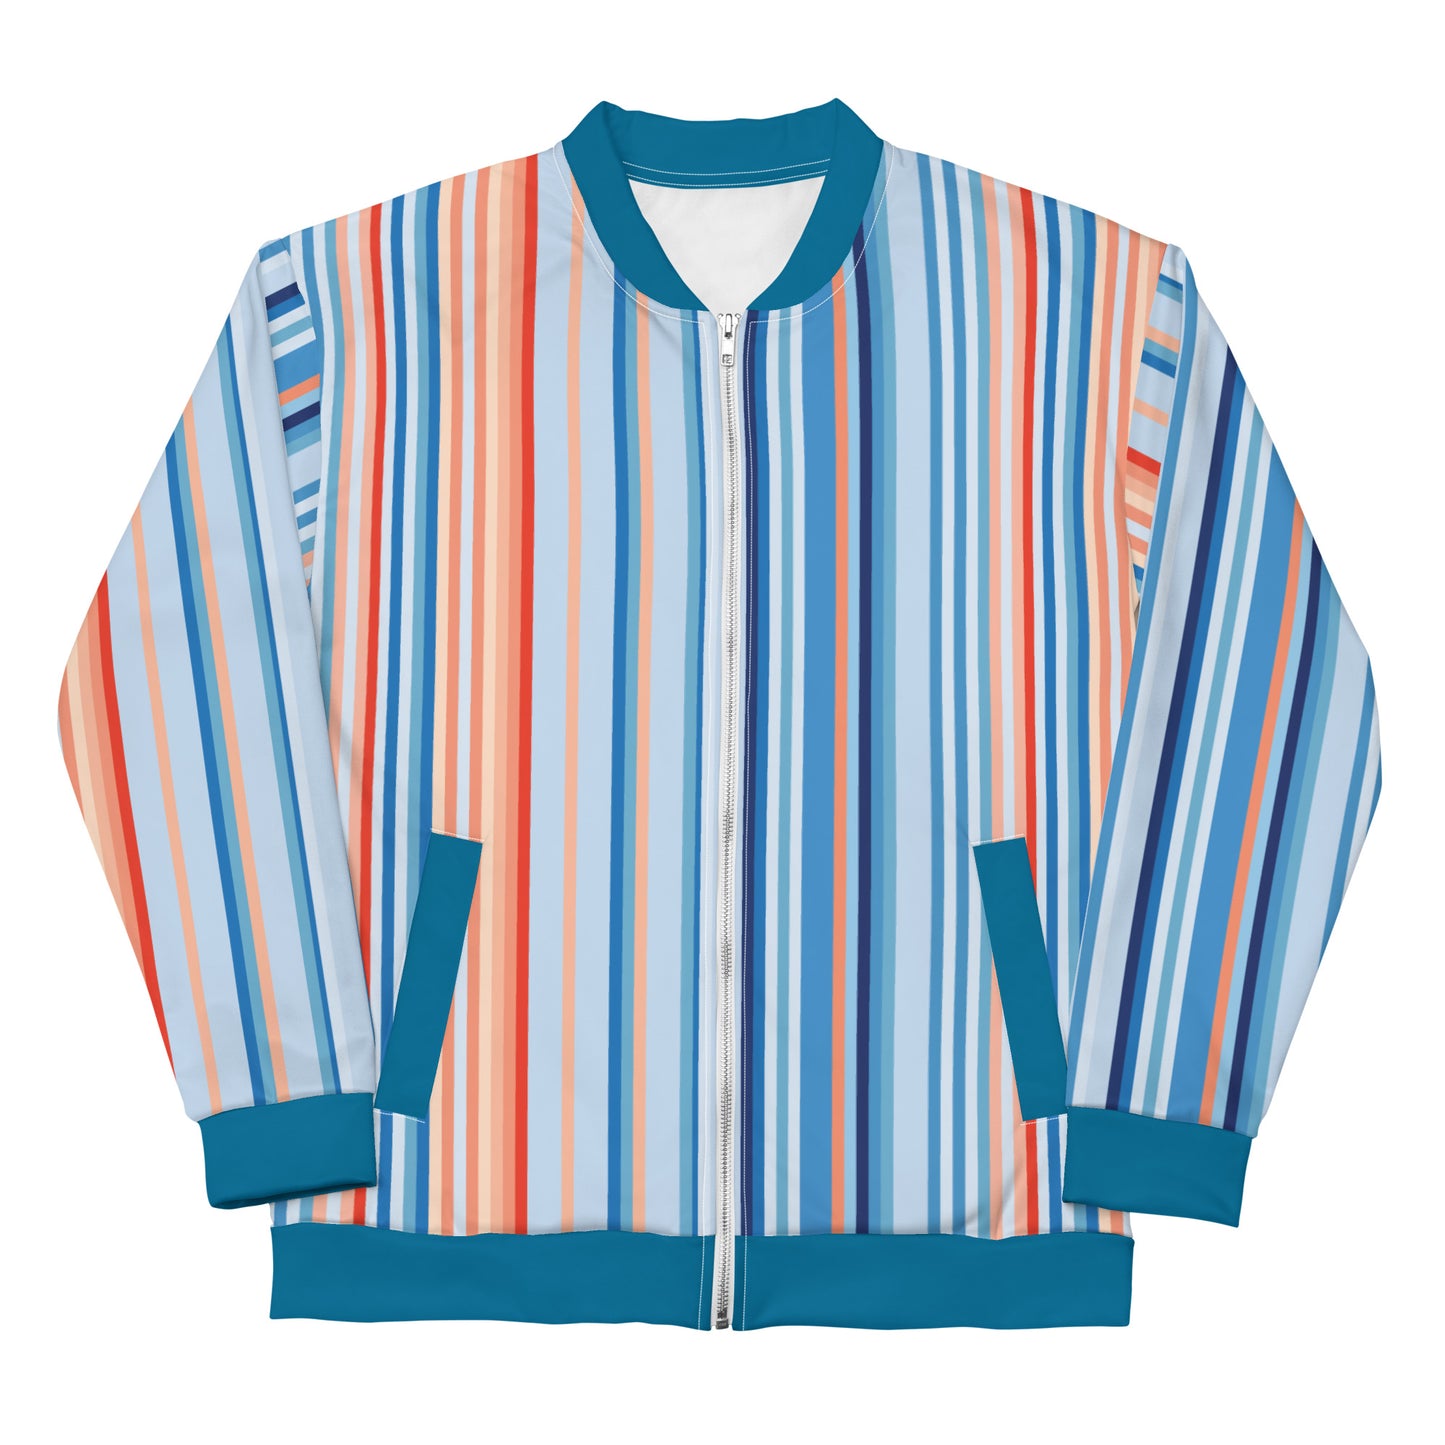 Climate Change Global Warming Stripes - Sustainably Made Bomber Jacket Vertical